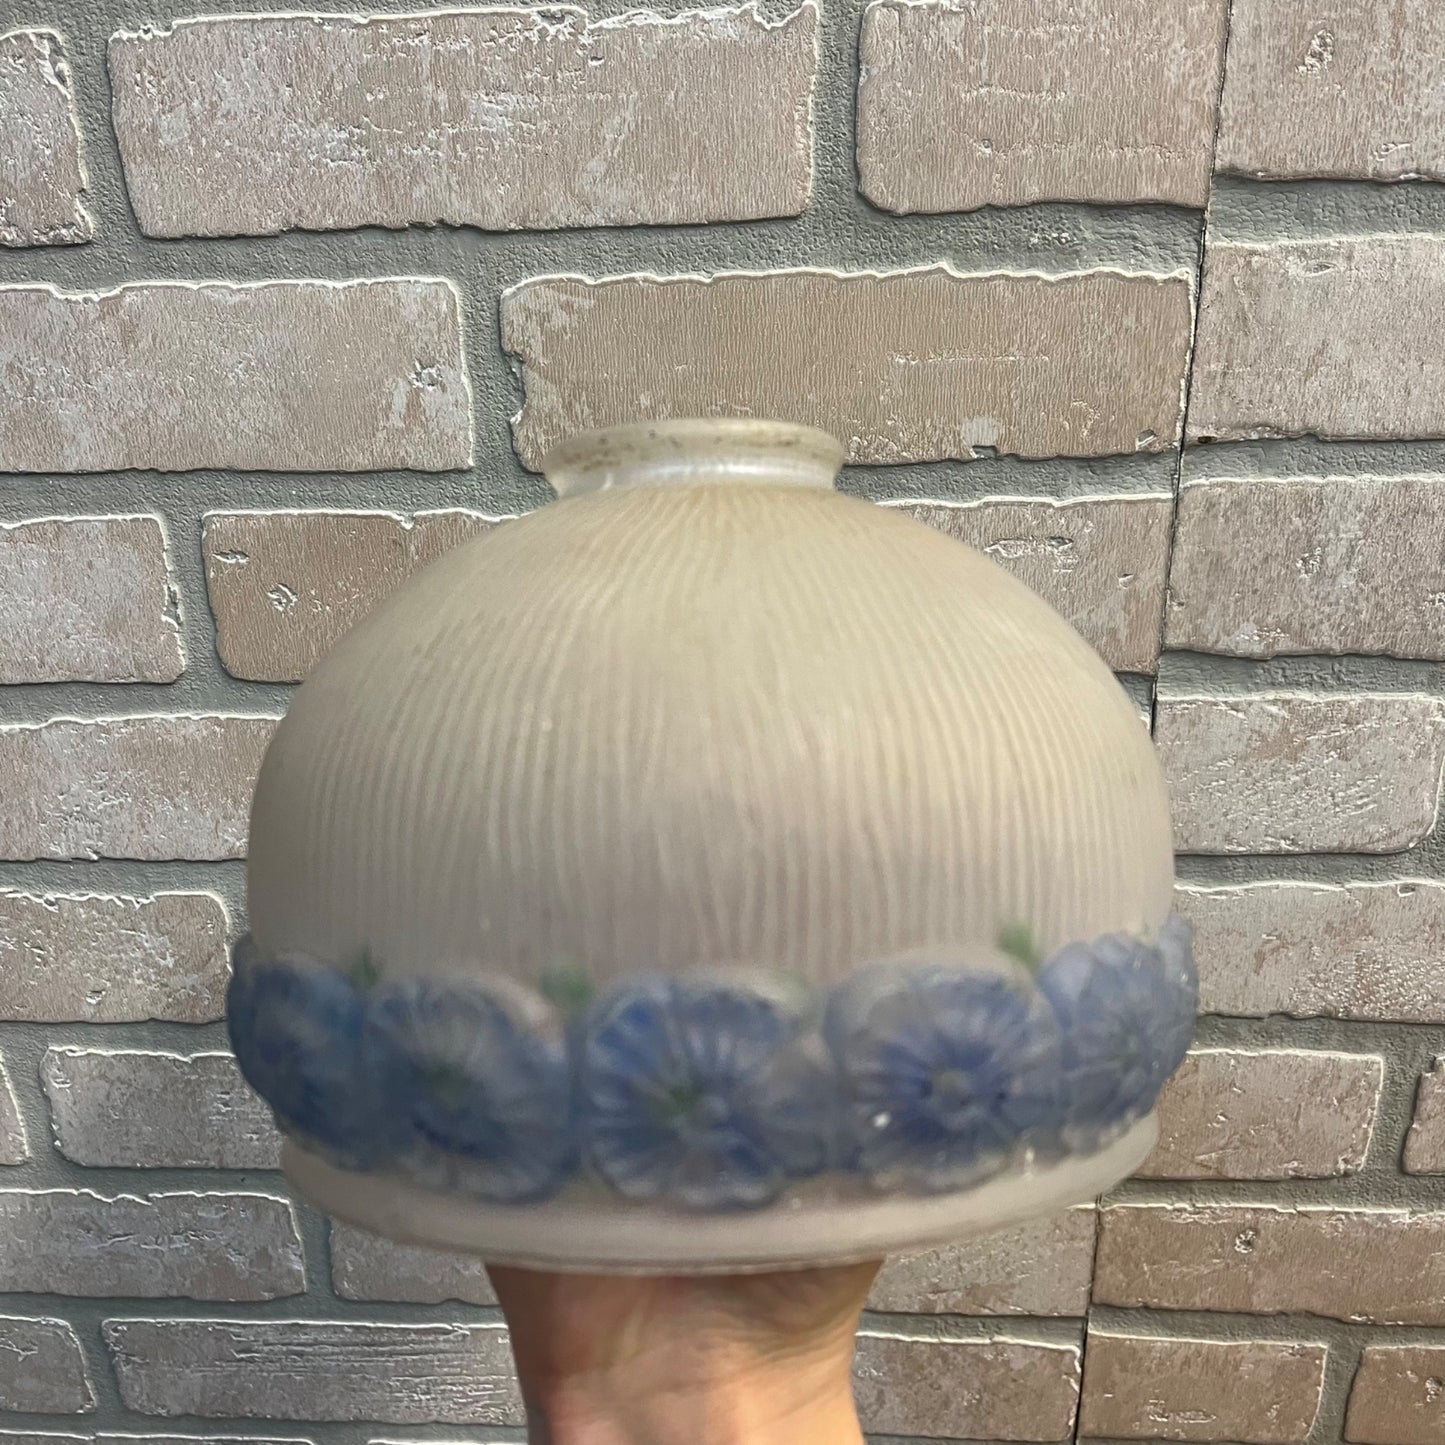 Vintage c1930s Art Deco Frosted Blue Flowers Textured Ceiling Light Lamp Shade Fitter